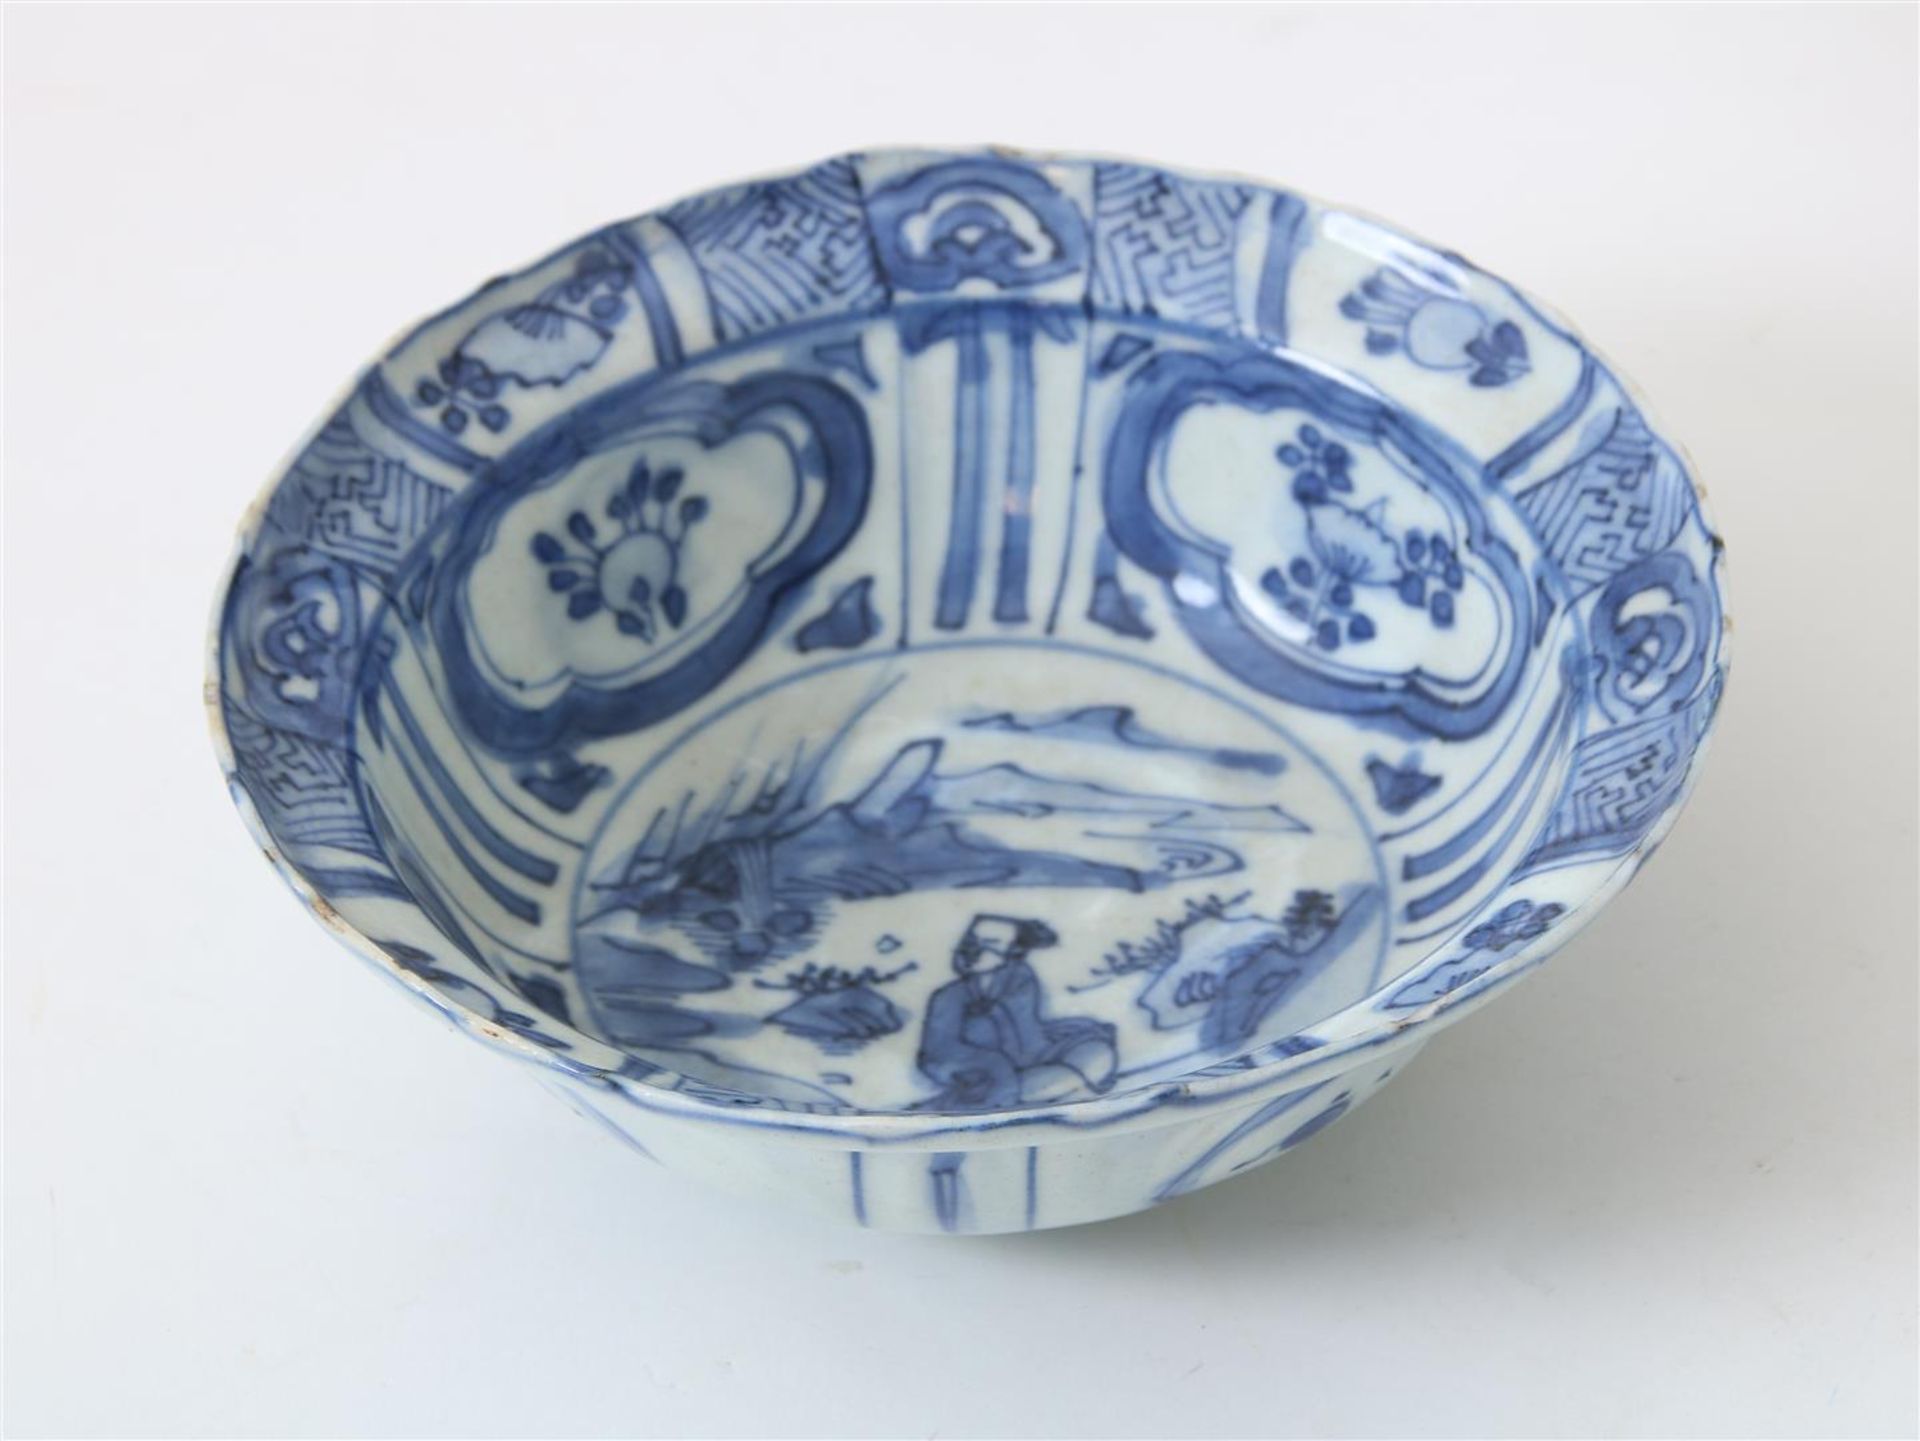 Kraak porcelain bowl decorated with landscape and flowers in Wanli motifs, China Wanli ( - Image 2 of 4